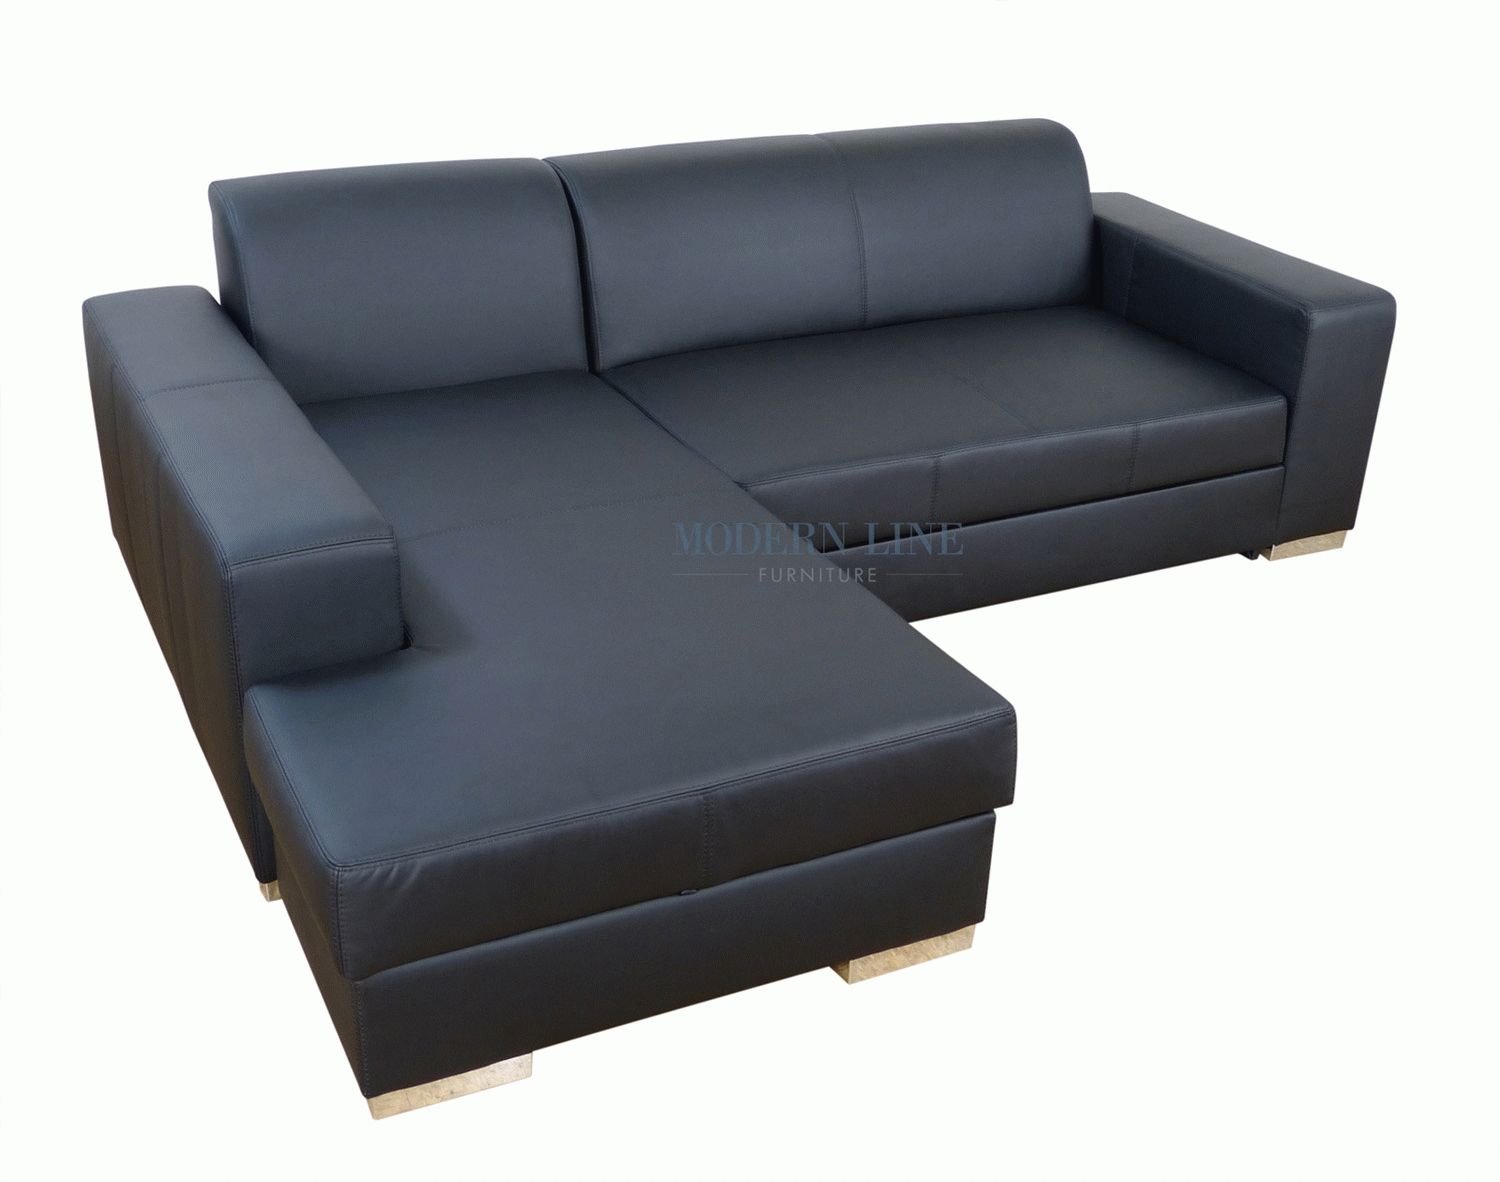 Leclaire Modern Italian Leather Sectional Sleeper With Storage Within Leather Storage Sofas (View 6 of 30)